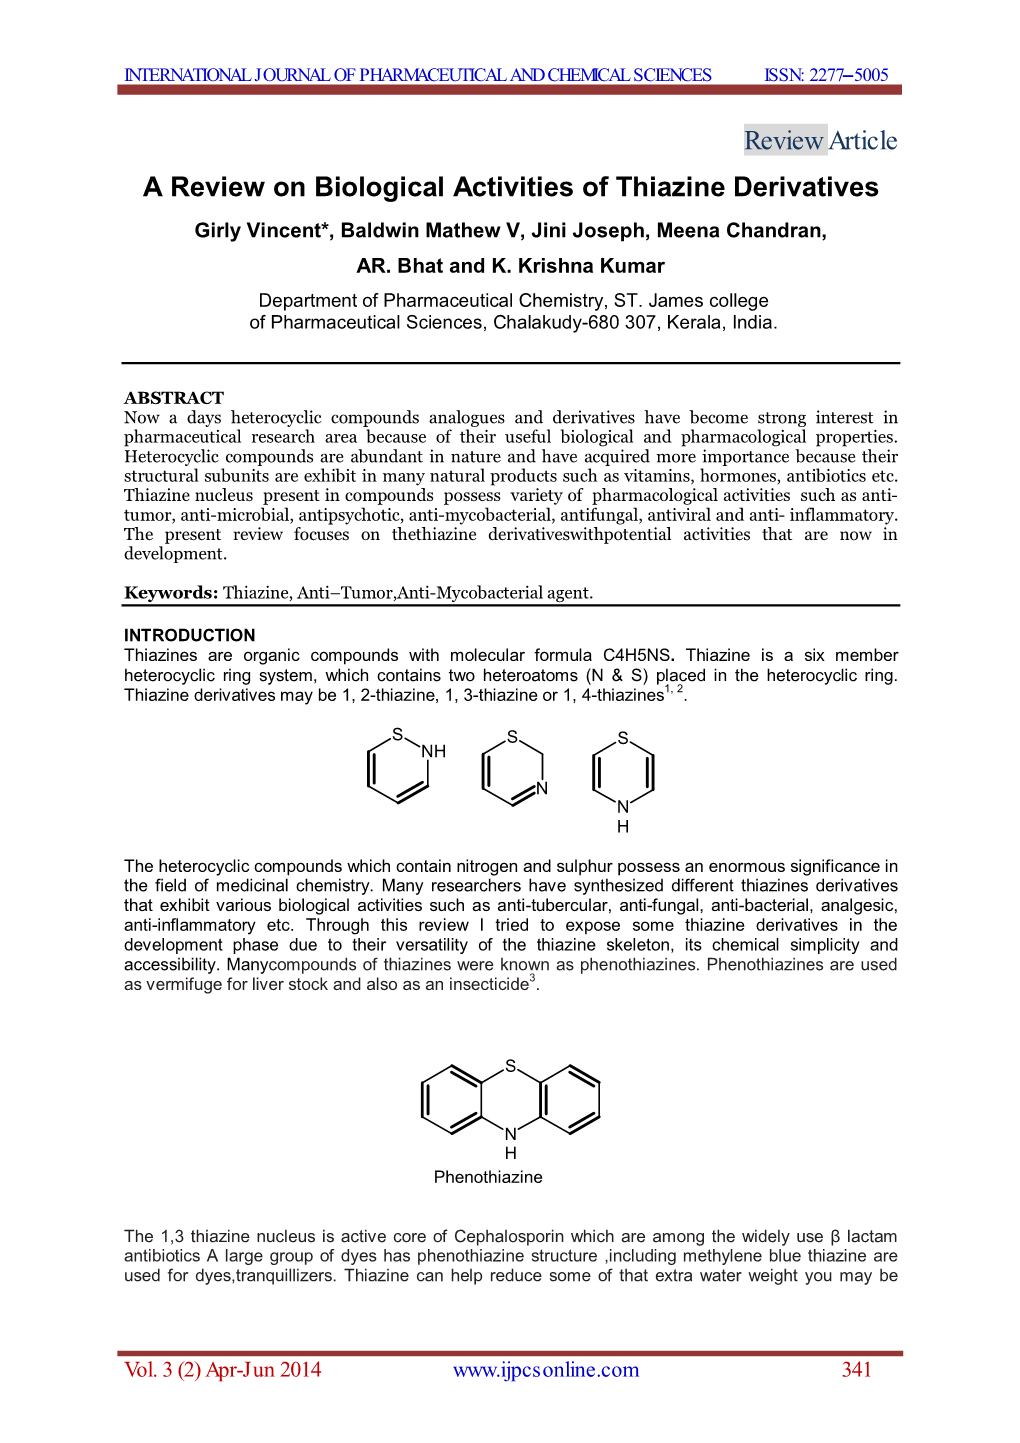 Review Article a Review on Biological Activities of Thiazine Derivatives Girly Vincent*, Baldwin Mathew V, Jini Joseph, Meena Chandran, AR